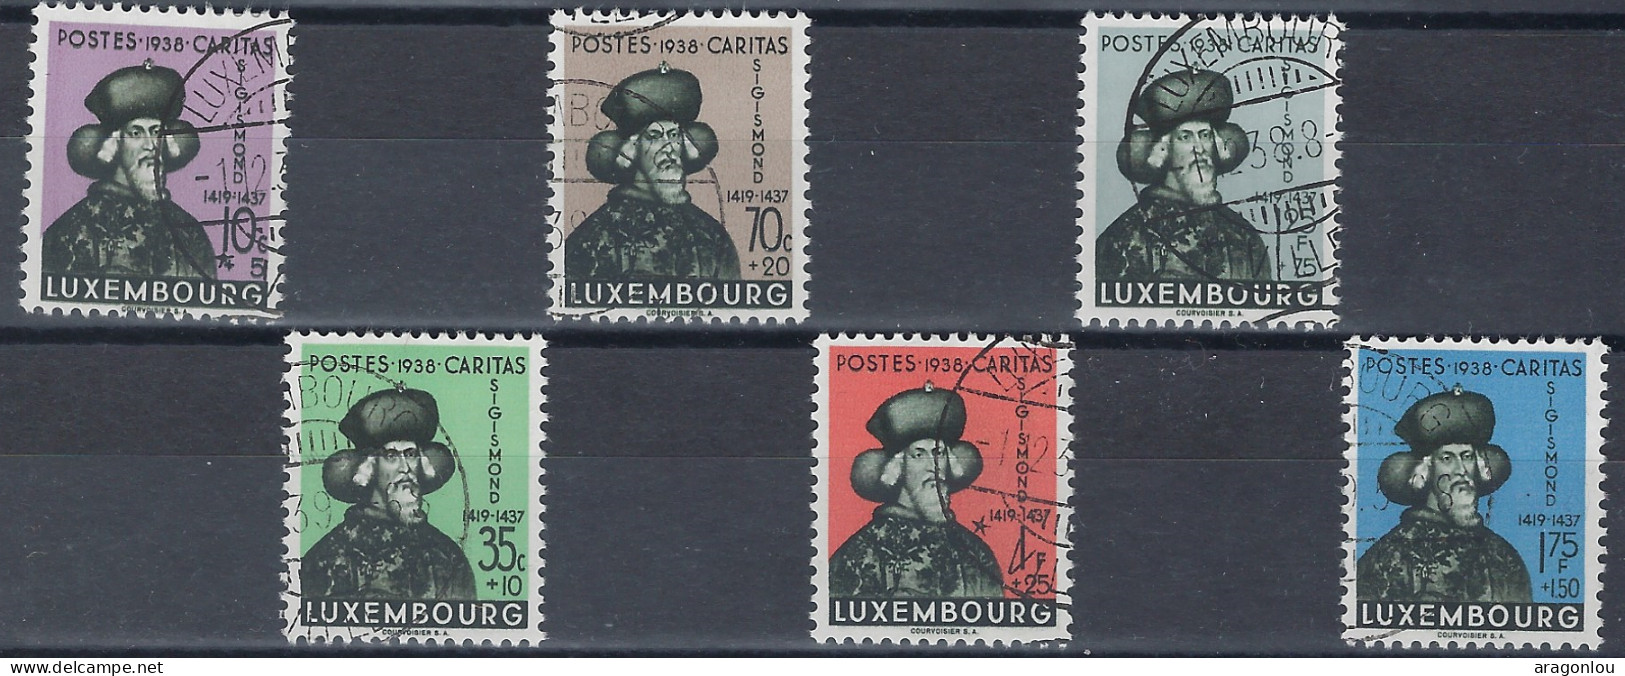 Luxembourg - Luxemburrg - Timbres  1938   Sigismund   Série   ° - Usati